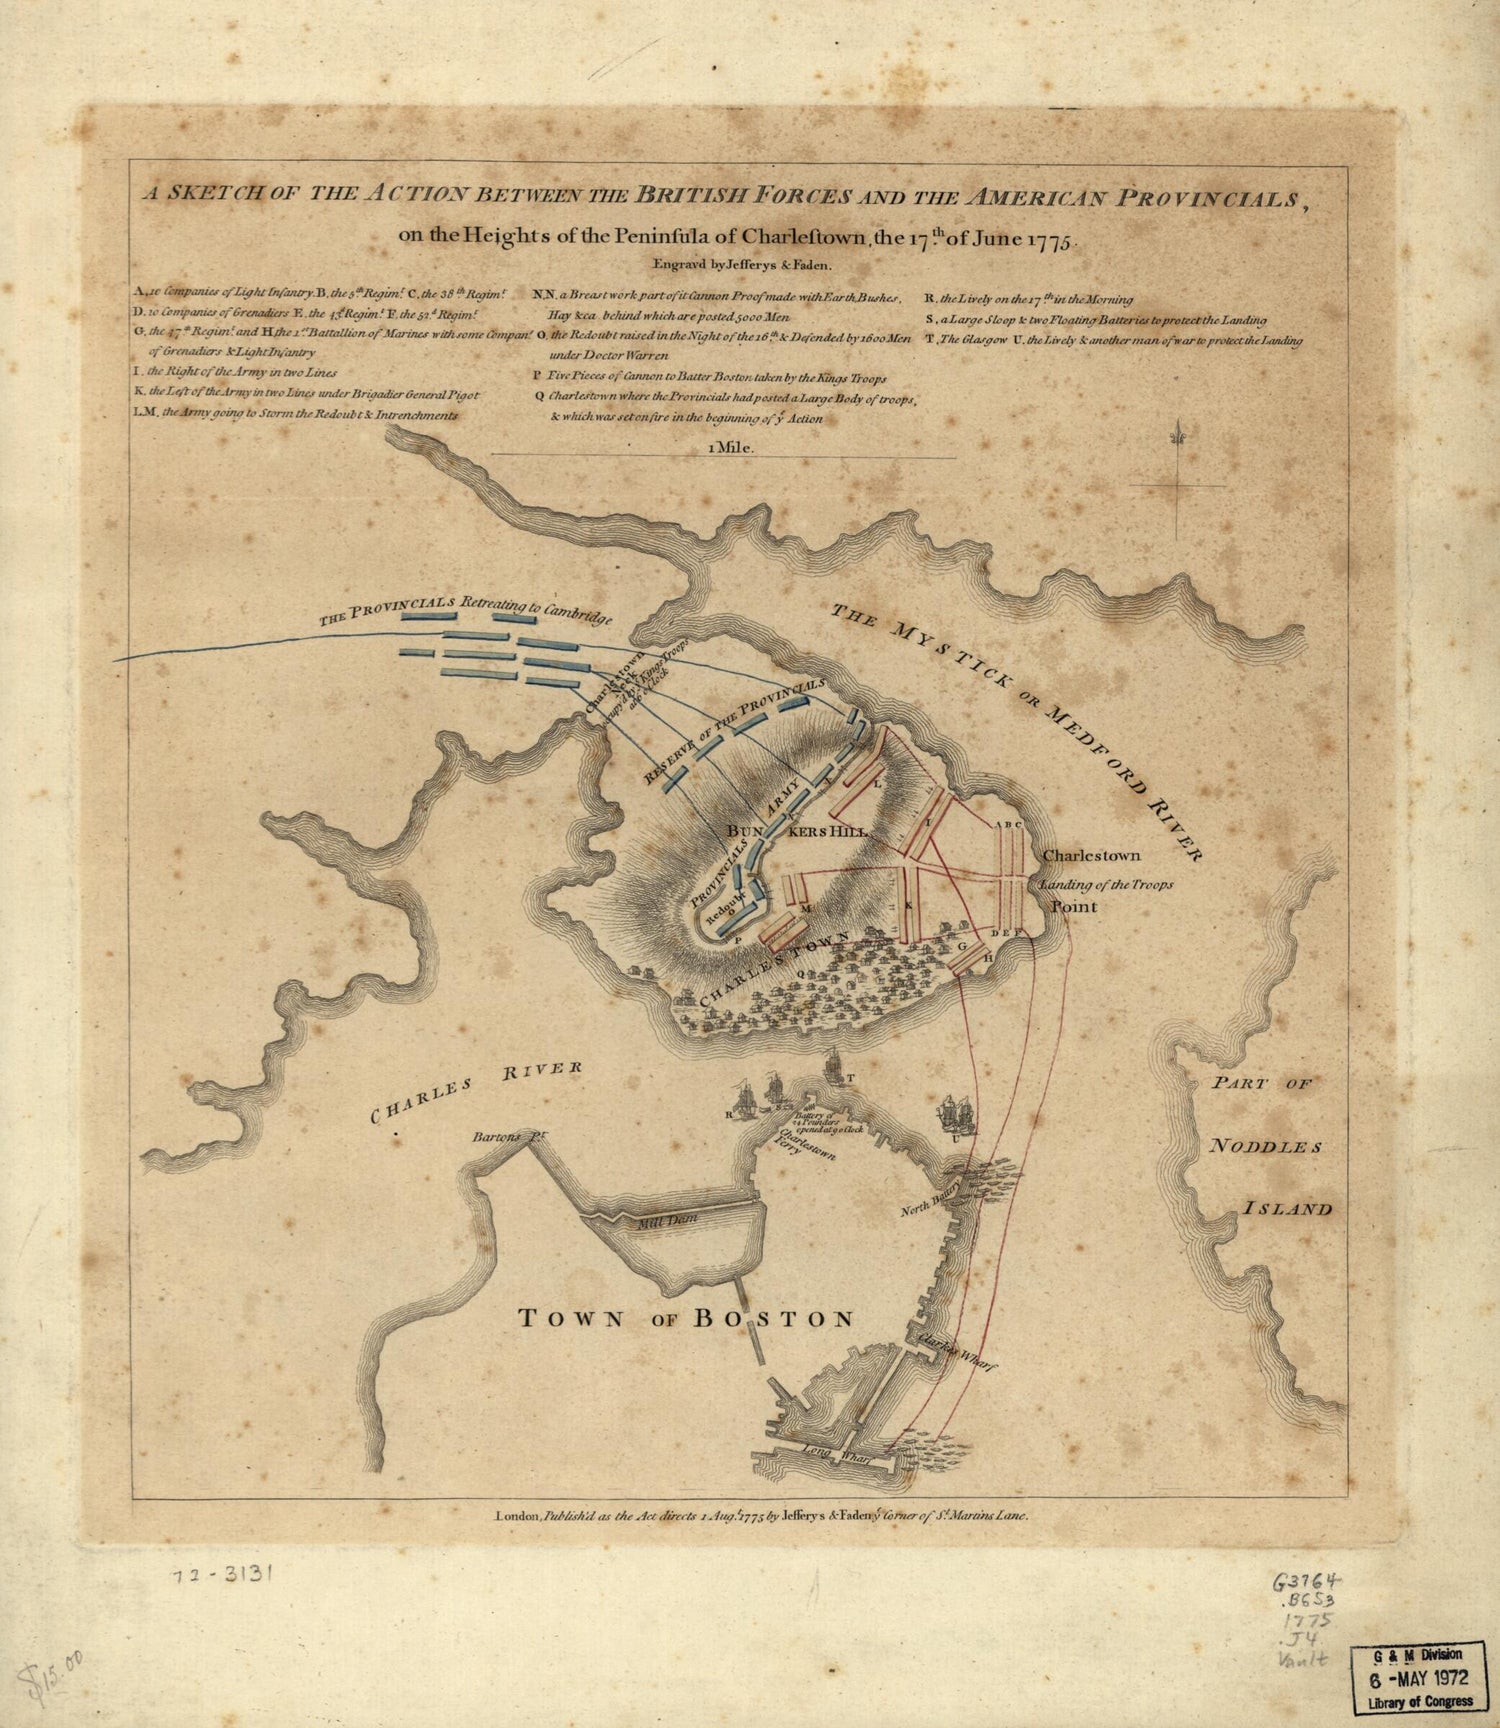 This old map of A Sketch of the Action Between the British Forces and the American Provincials, On the Heights of the Peninsula of Charlestown, the 17th of June from 1775 was created by William Faden, Thomas Jefferys in 1775